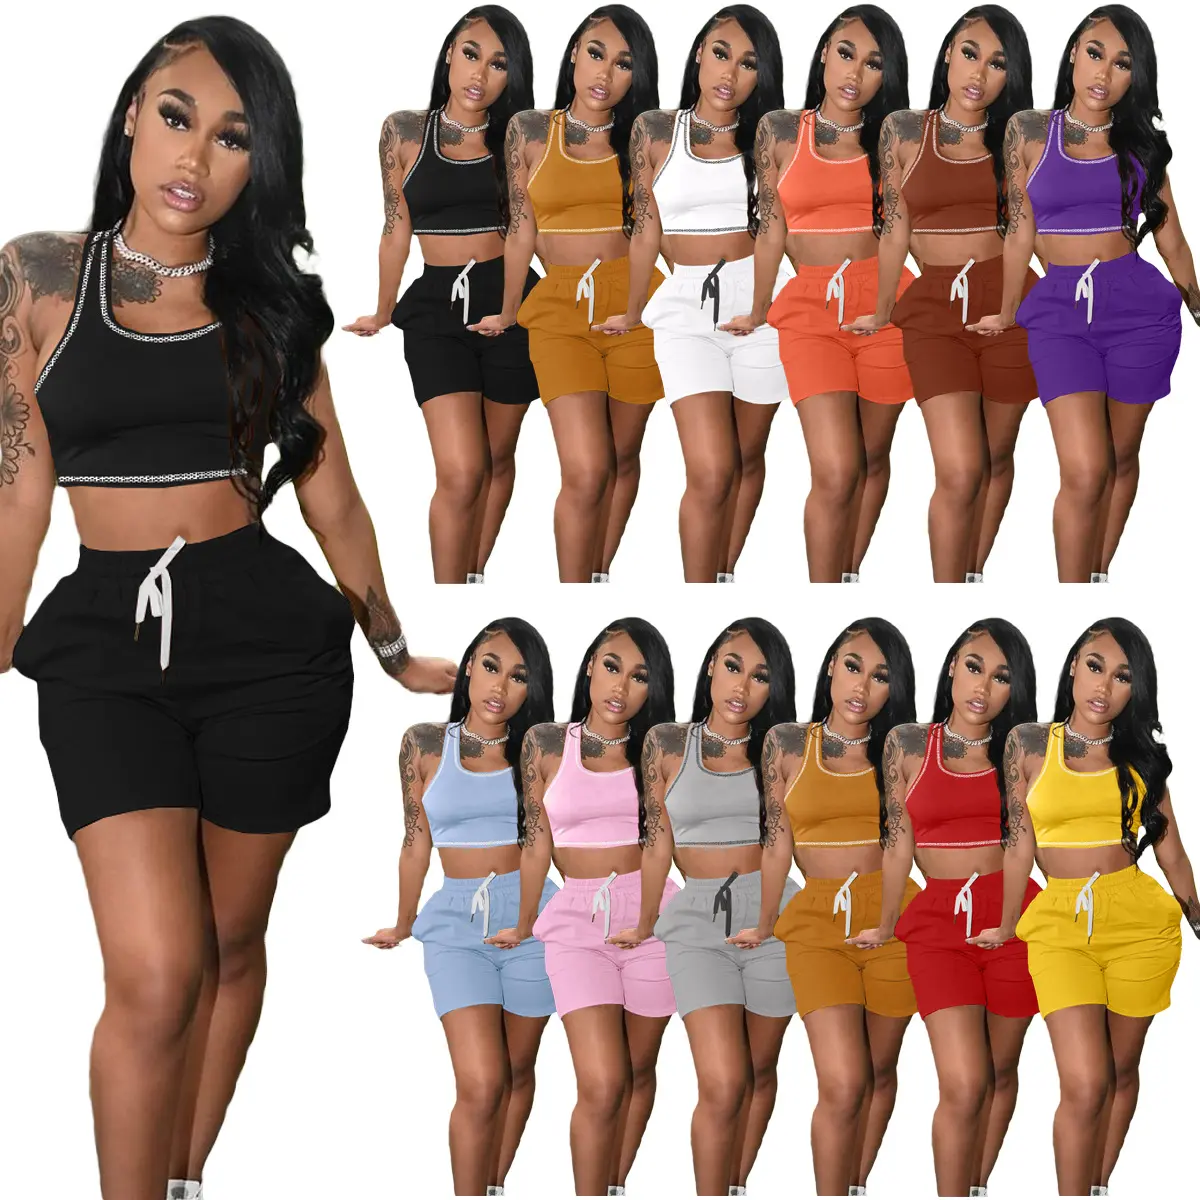 Knitted 2 Piece Club Outfits Summer Clothes Sexy Party Matching Set Sleeveless Bandage Crop Top Bodycon Shorts For Women